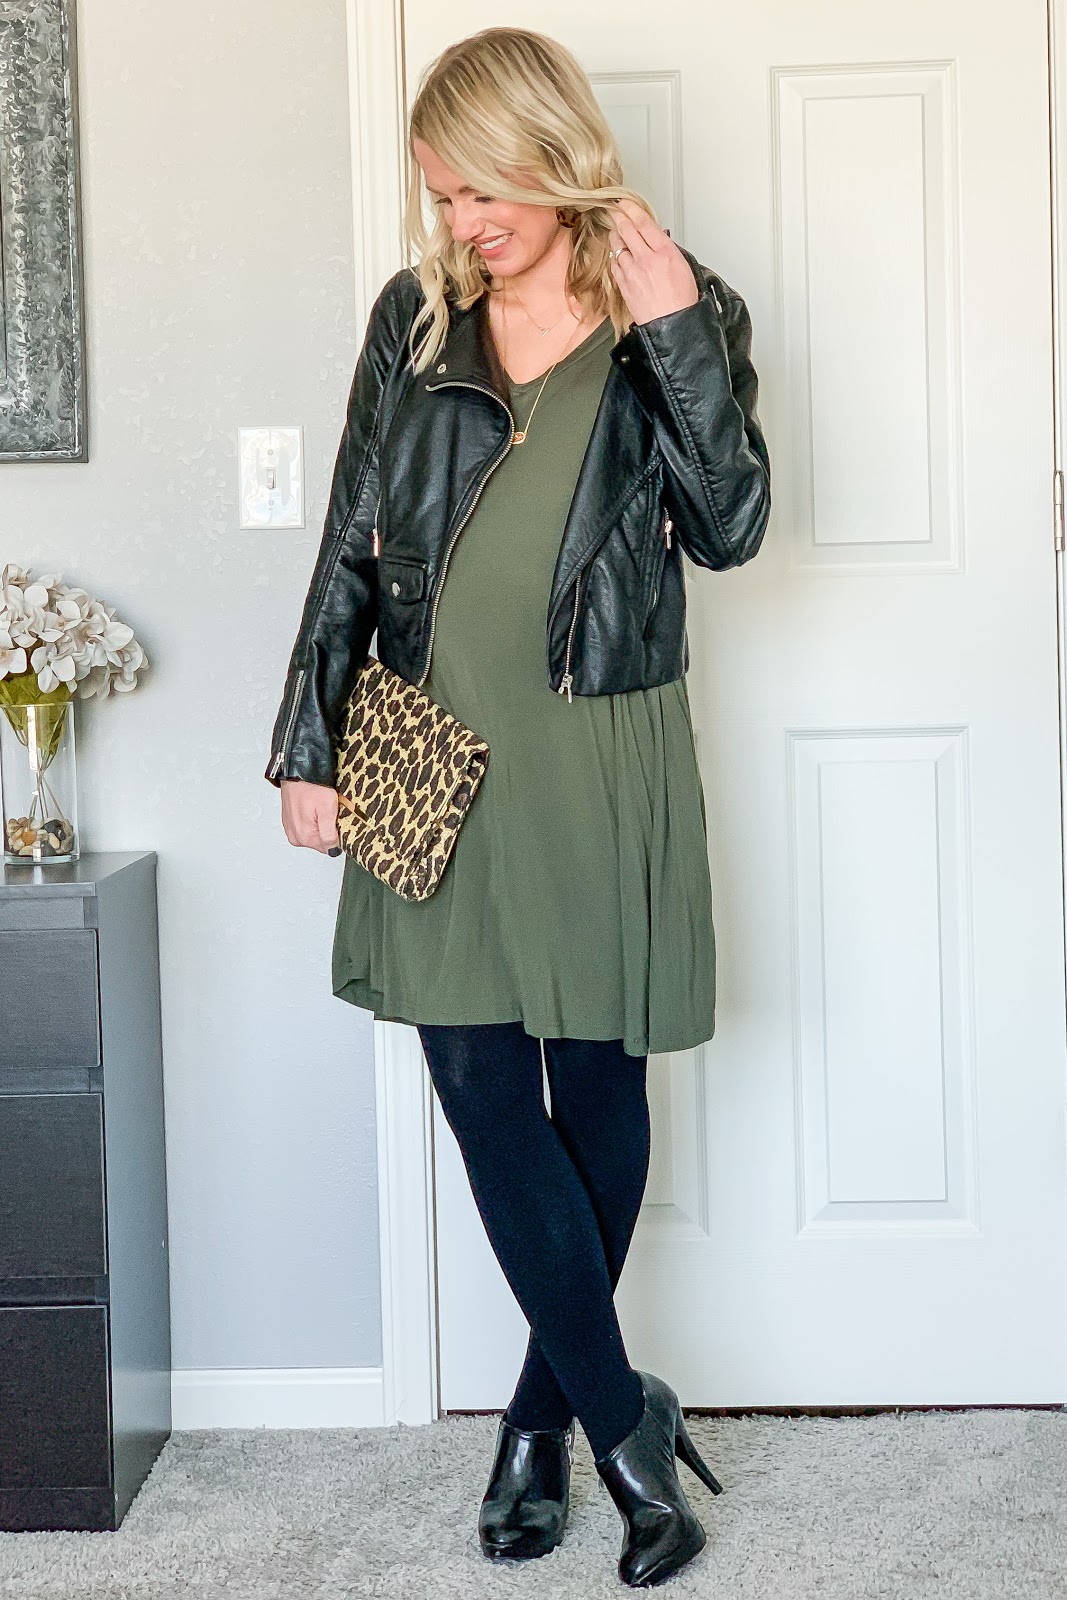 4 Ways to Style One Dress- From Winter to Spring | Thrifty Wife, Happy Life